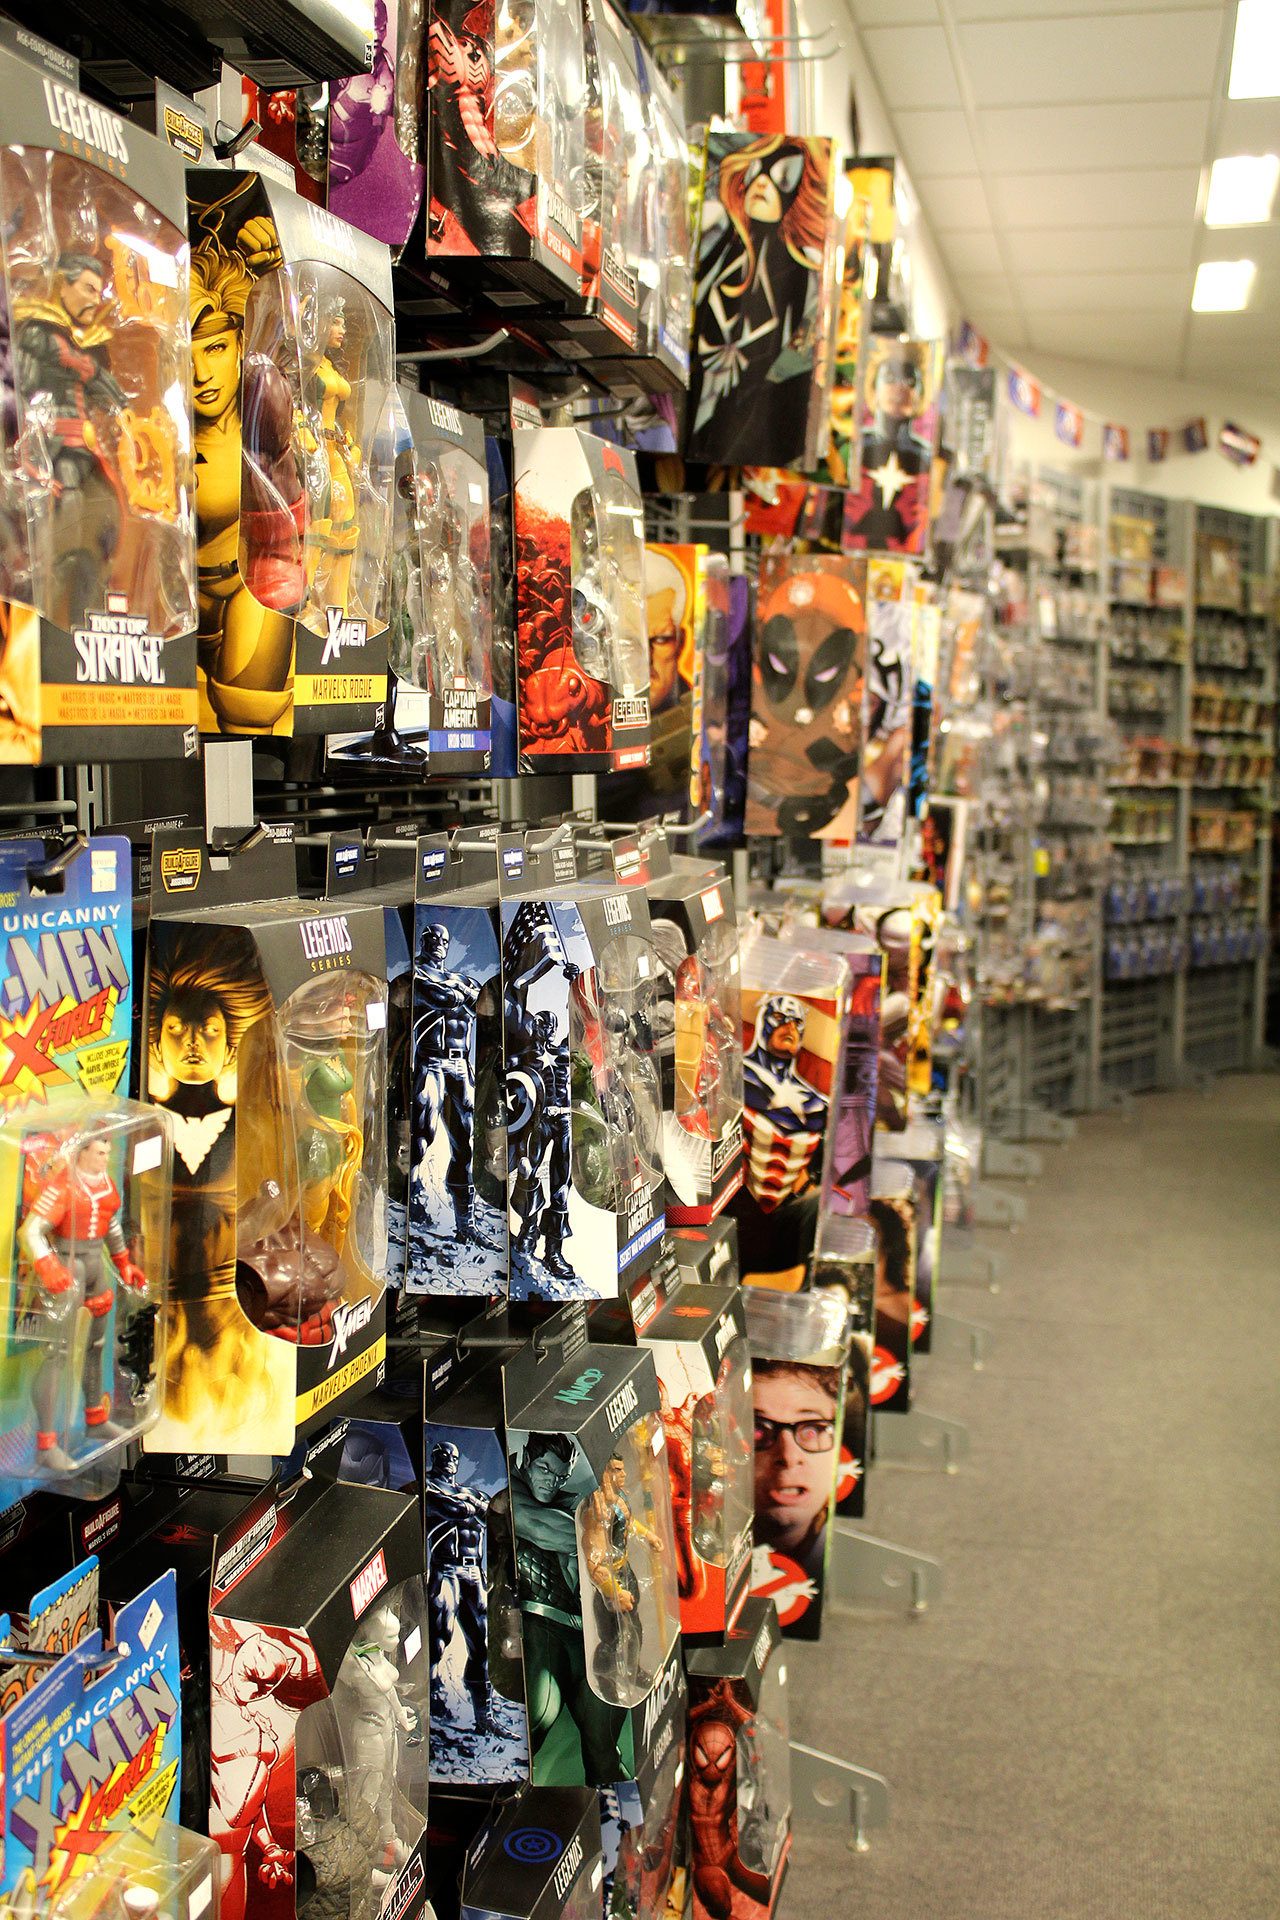 Avalon Comics and Games sells new releases and classic editions, and is staffed by knowledgable people who can help a newbie find a starting place in decades worth of comics. The store also sells tabletop games, and hosts game day events. Michelle Beahm / Kitsap News Group